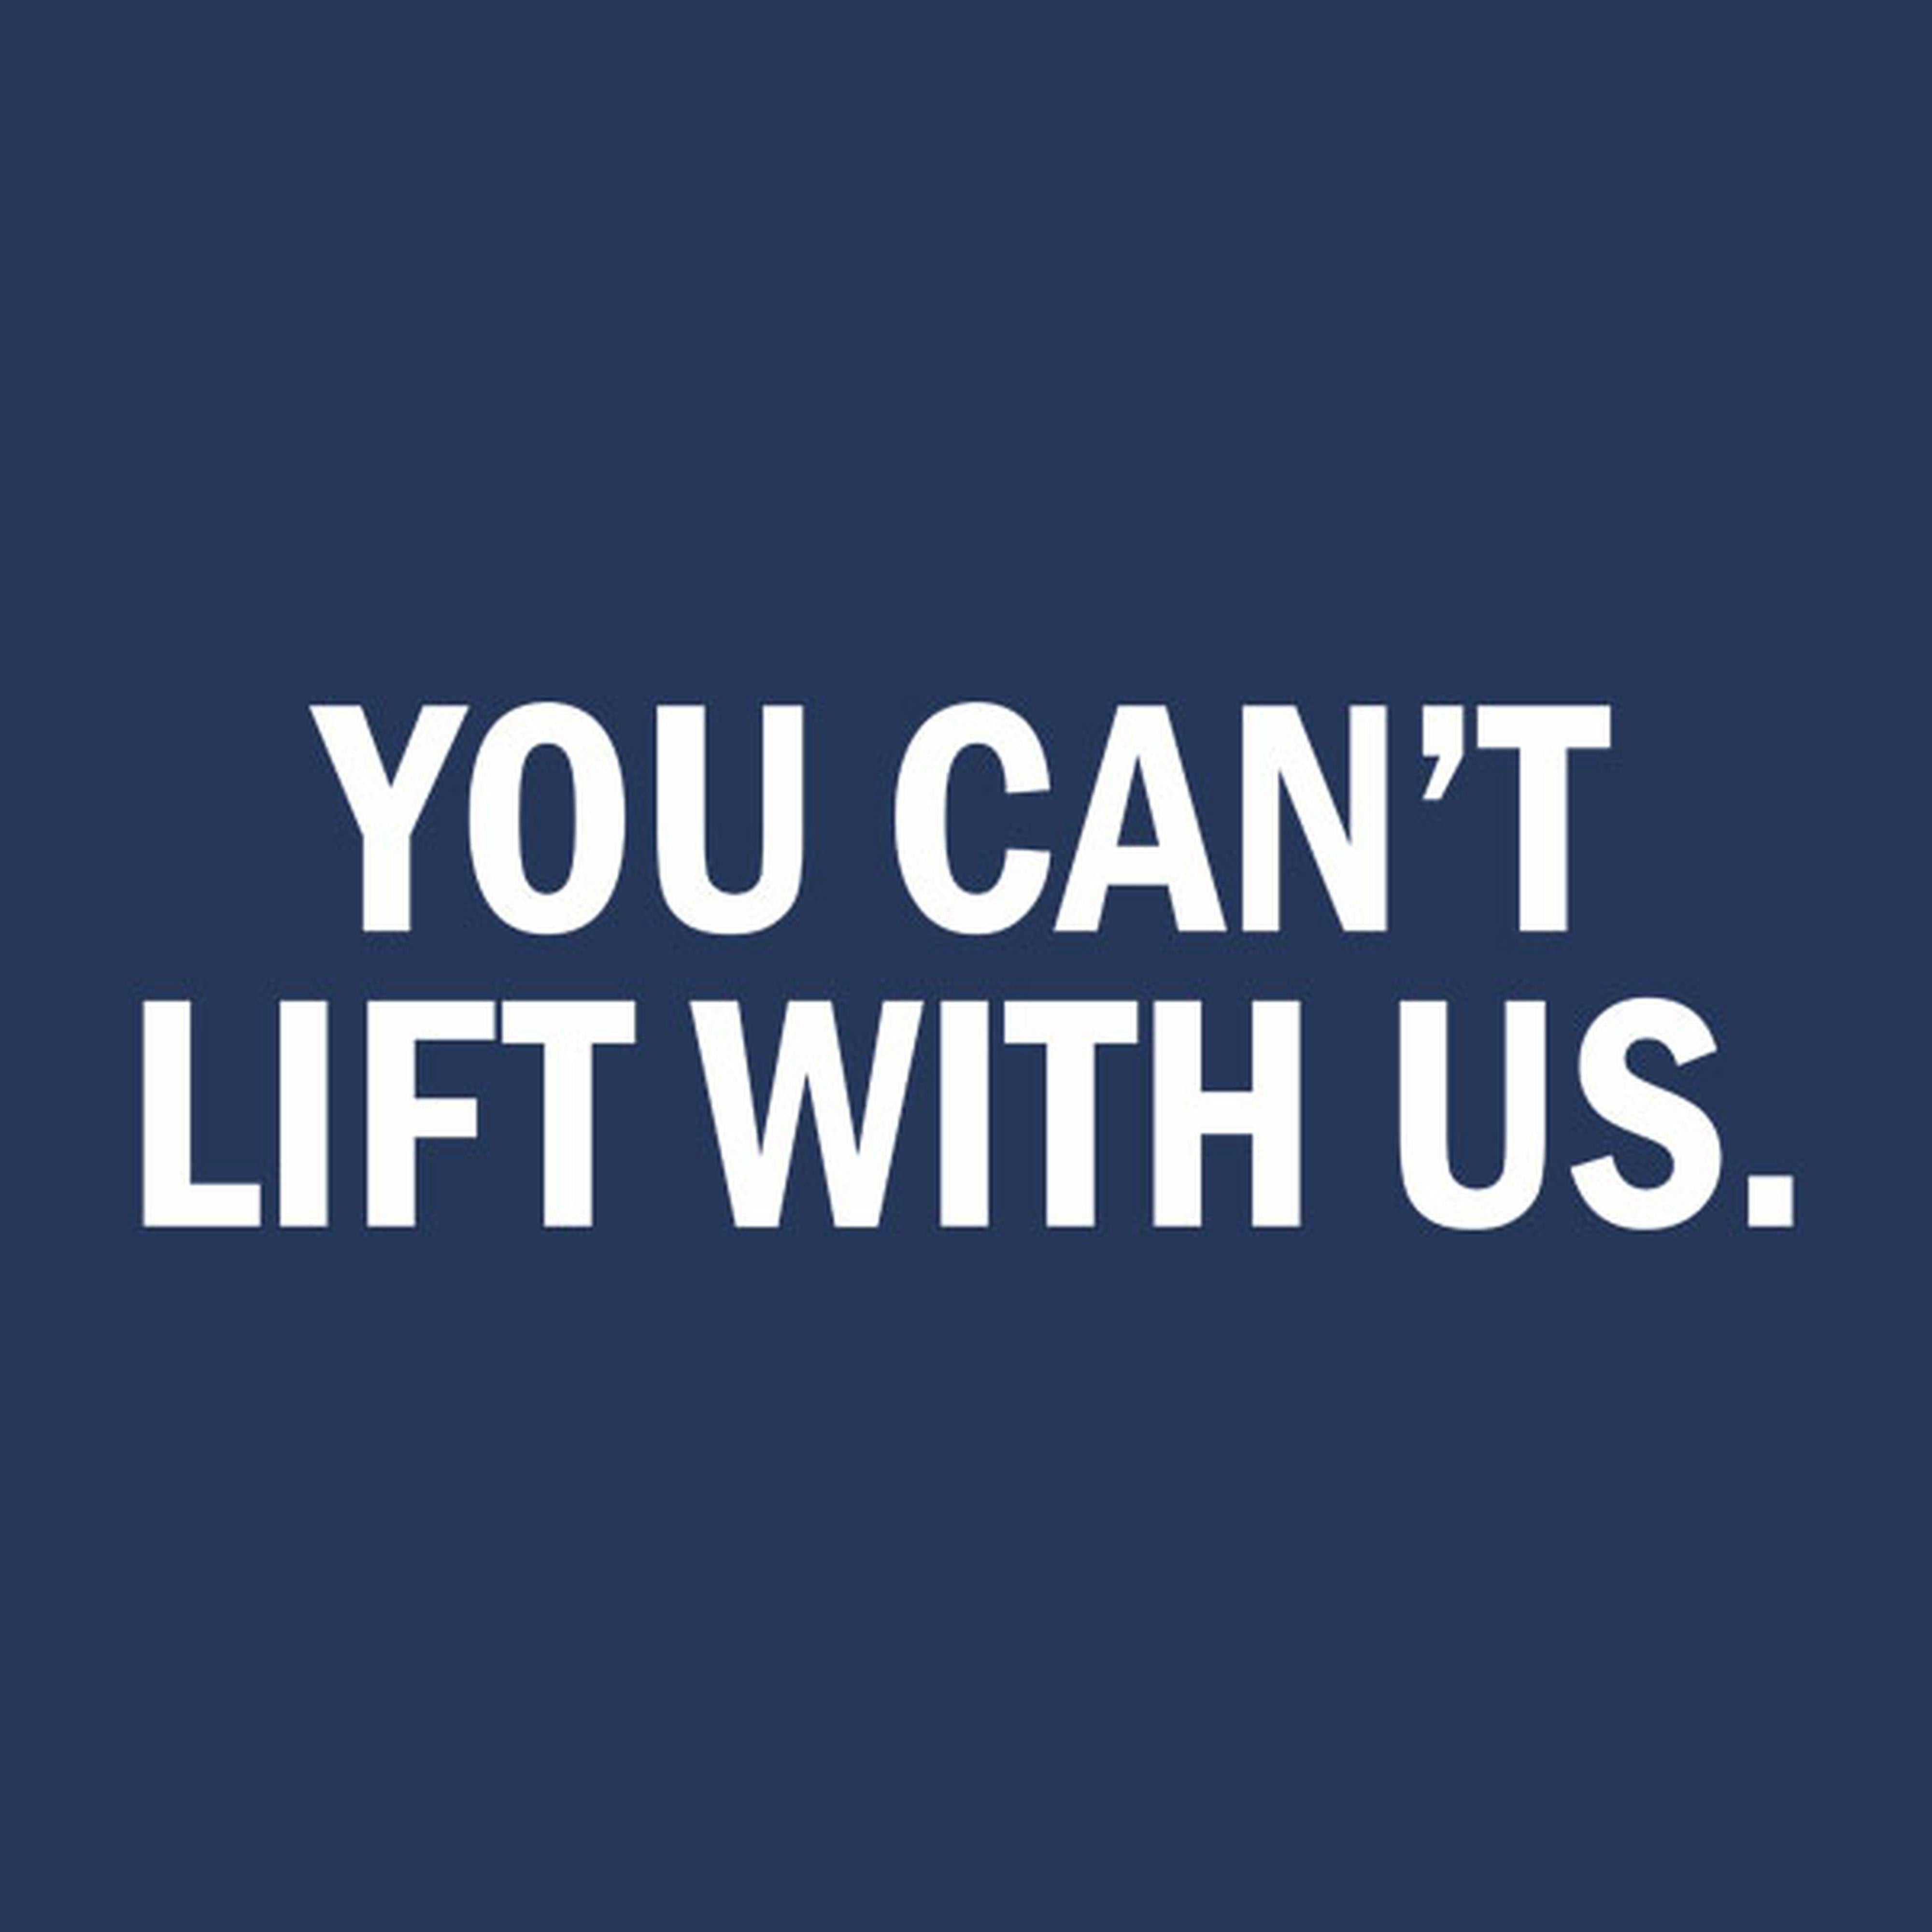 You can't lift with us